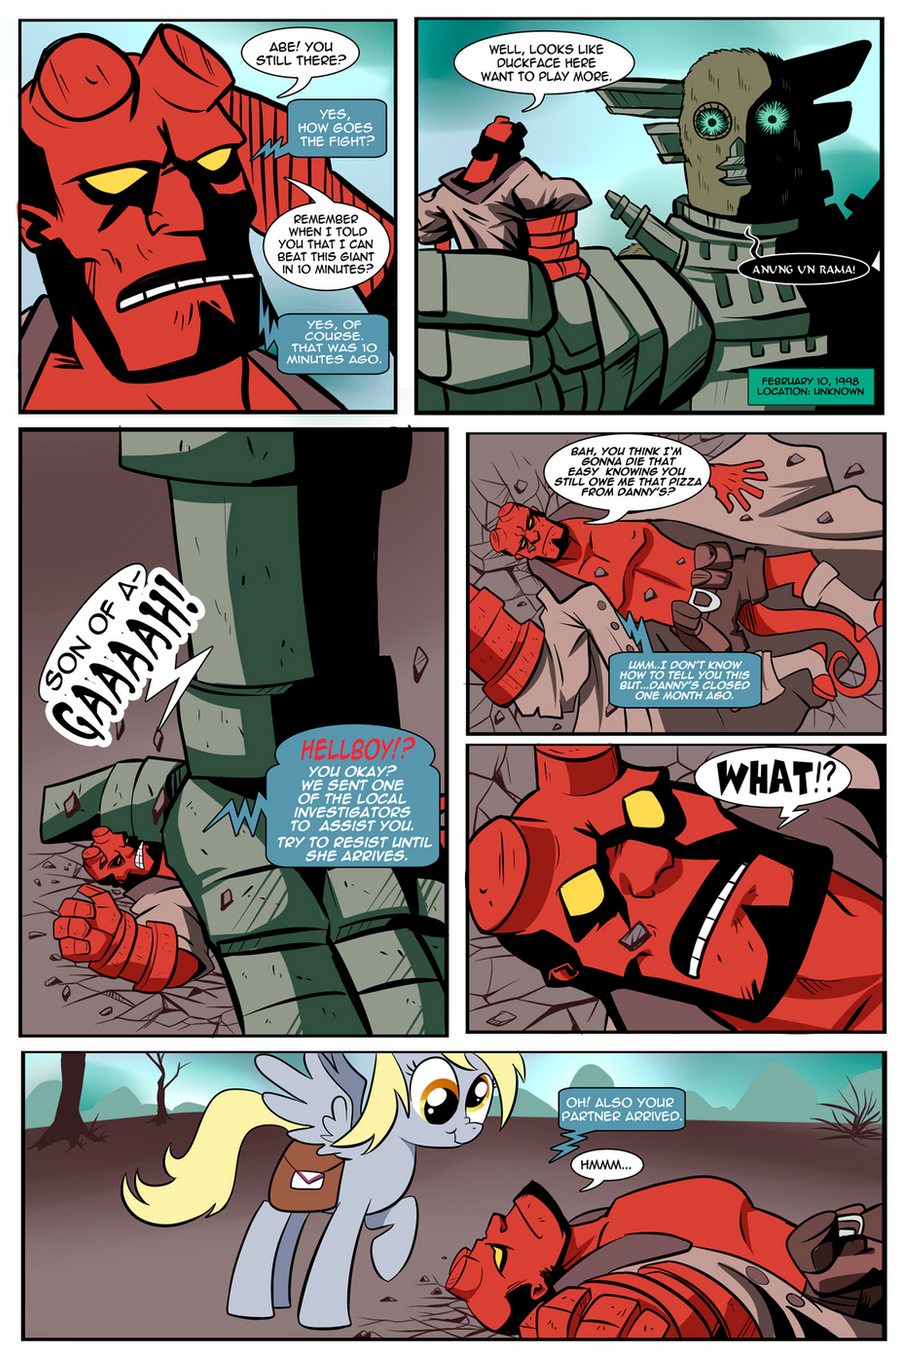 [Image: team_up_derpy_hellboy_01_by_csimadmax-d56ktsv.png]